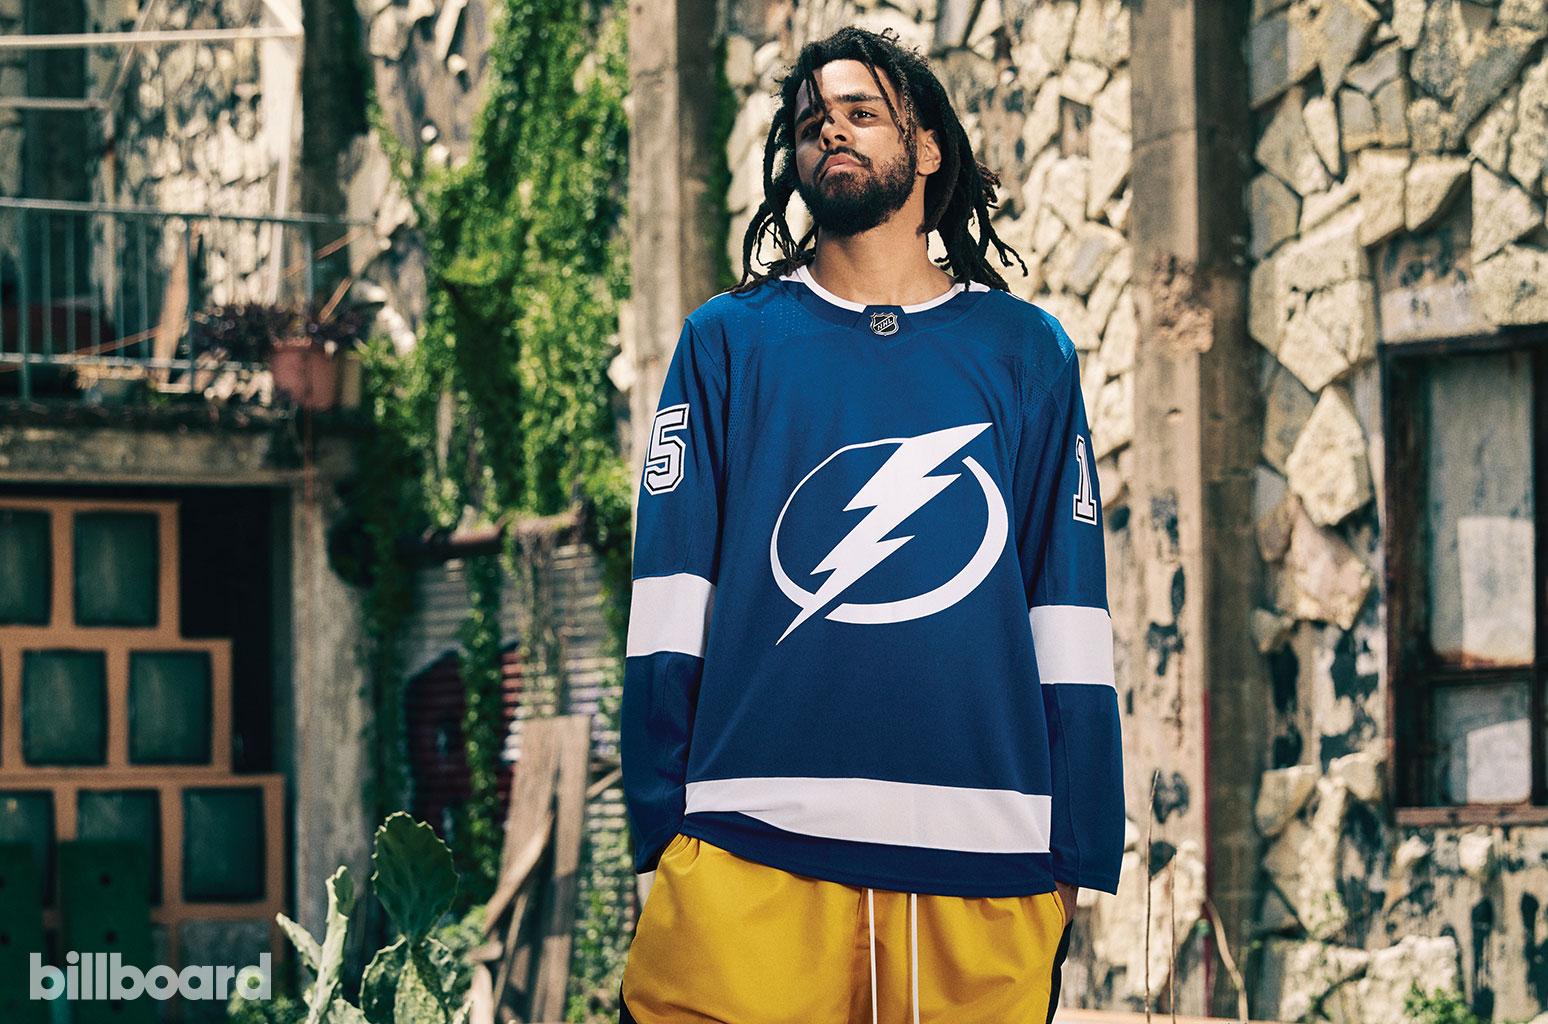 J. Cole's Dreamville Label Releases 'Revenge of the Dreamers III